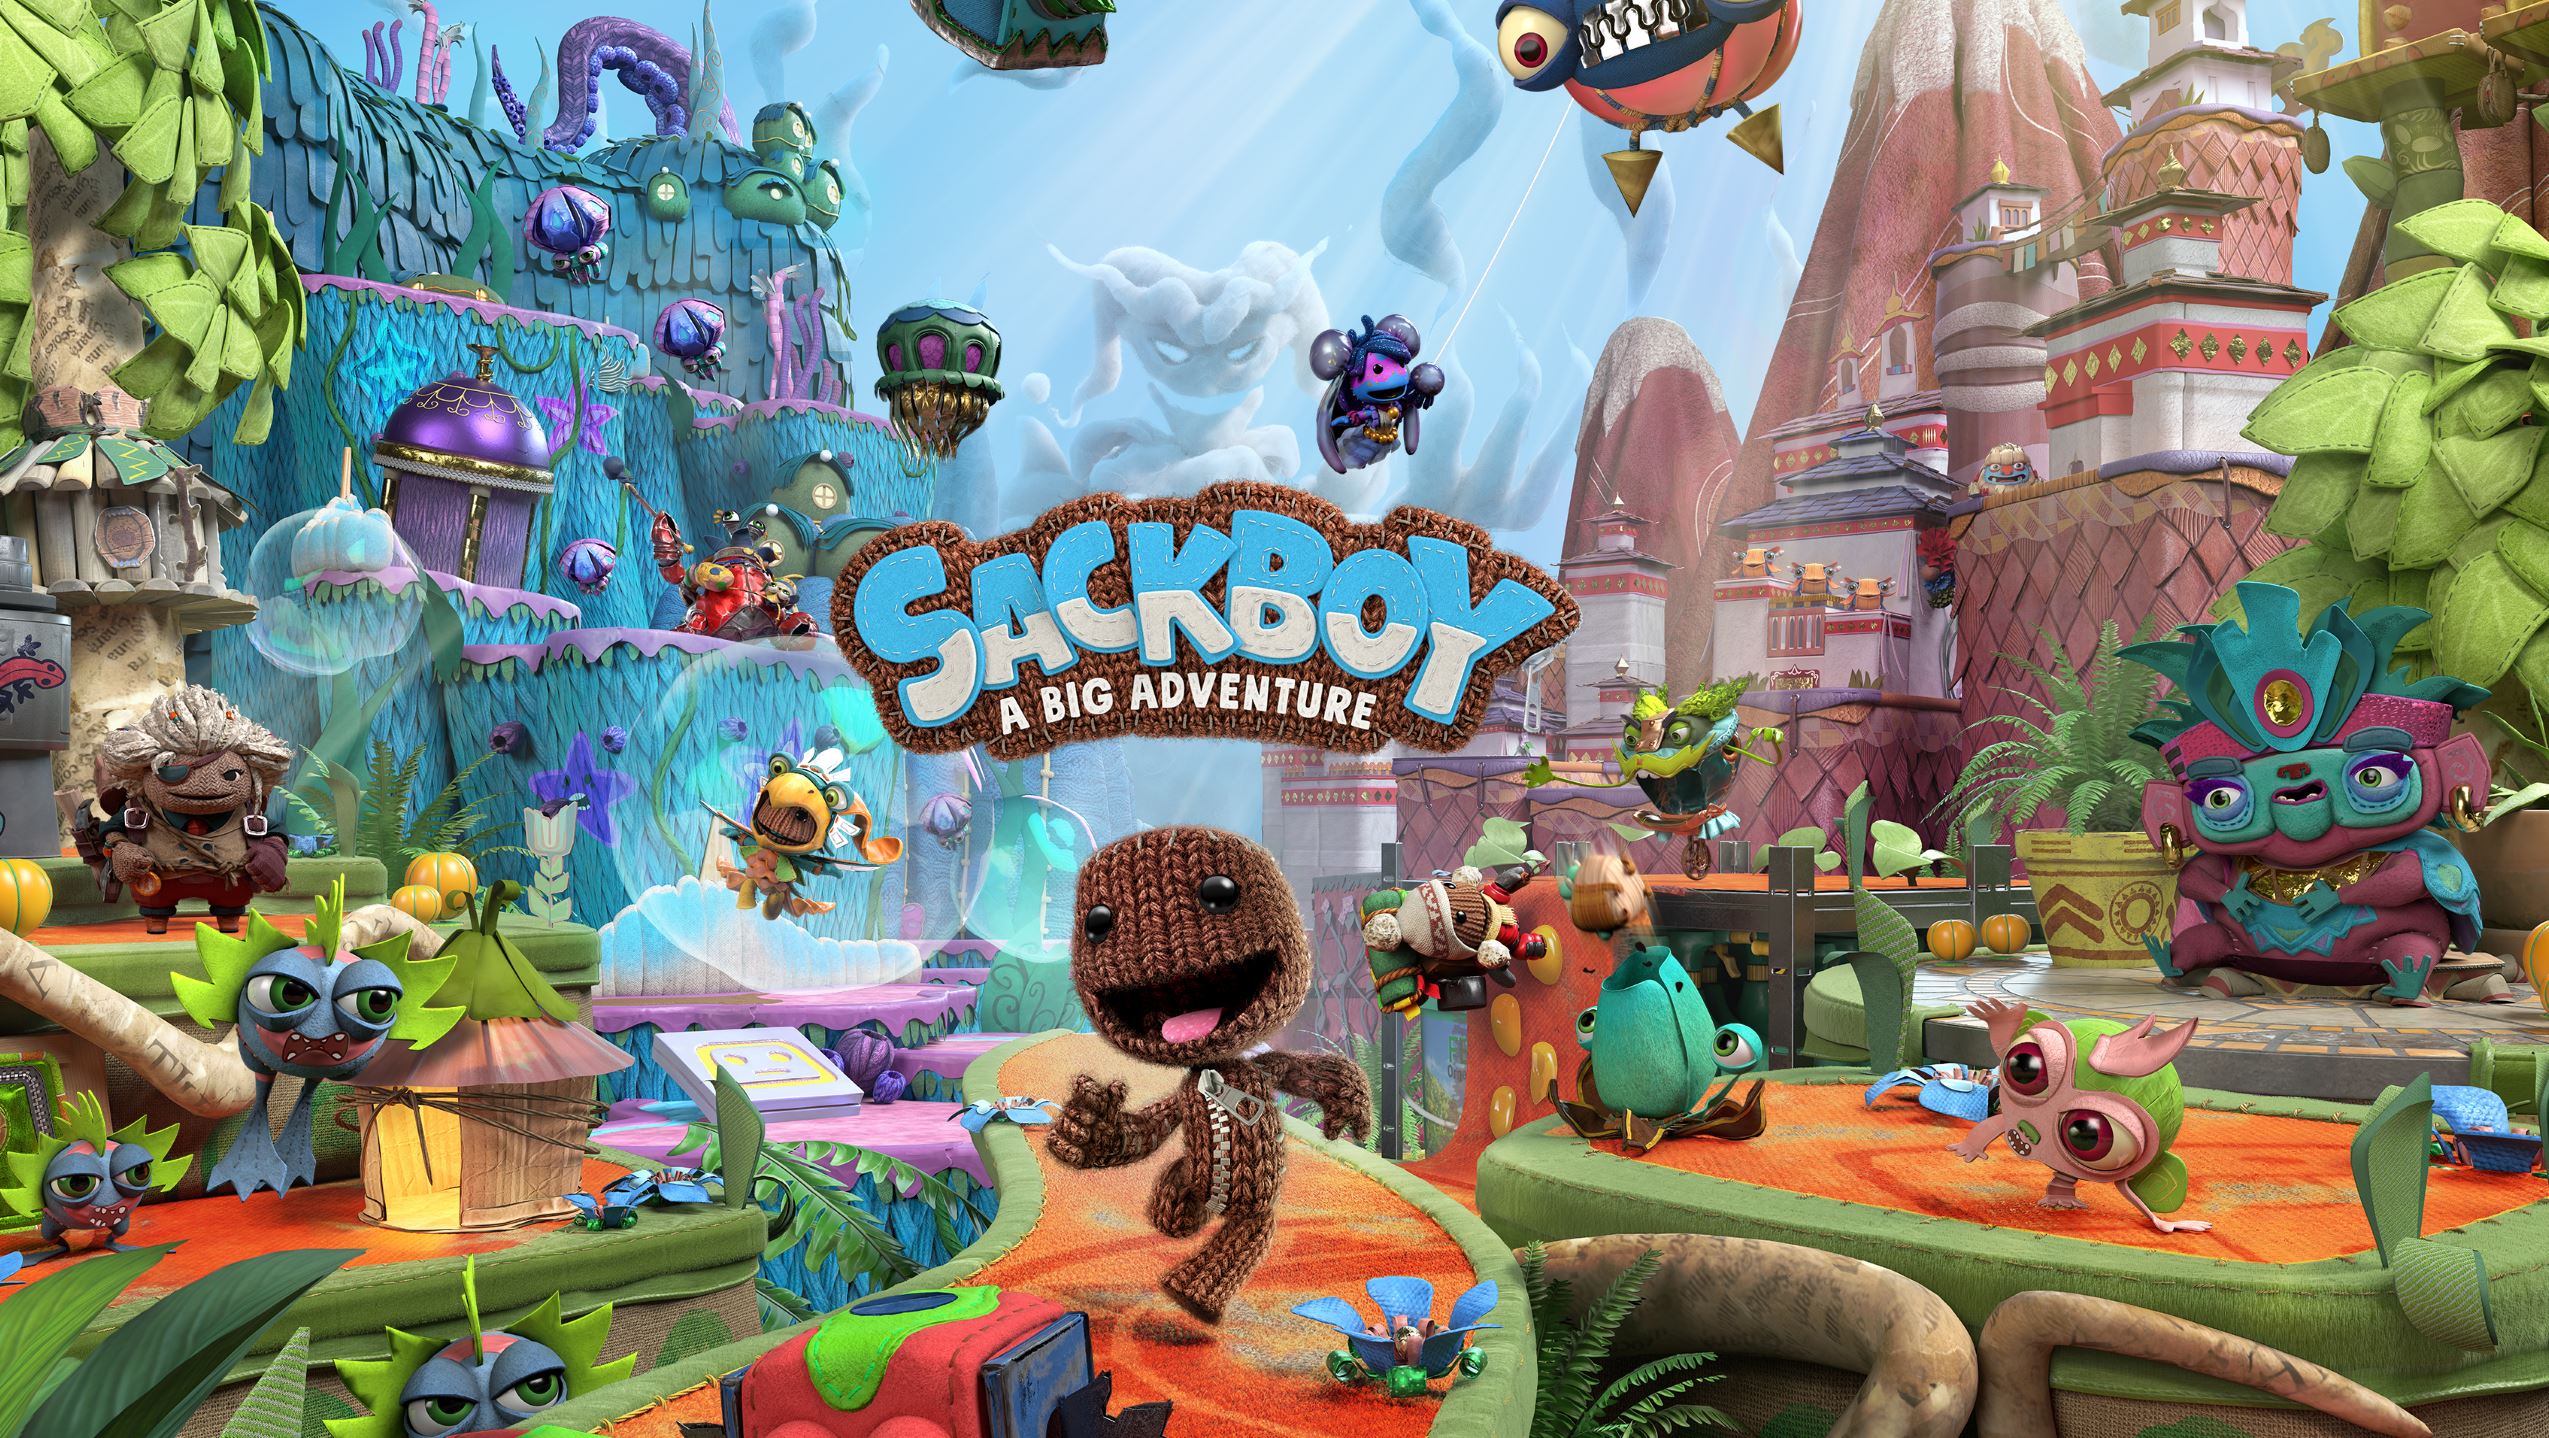 Sackboy: A Big Adventure multiplayer update is now live with cross-save and  cross-play support